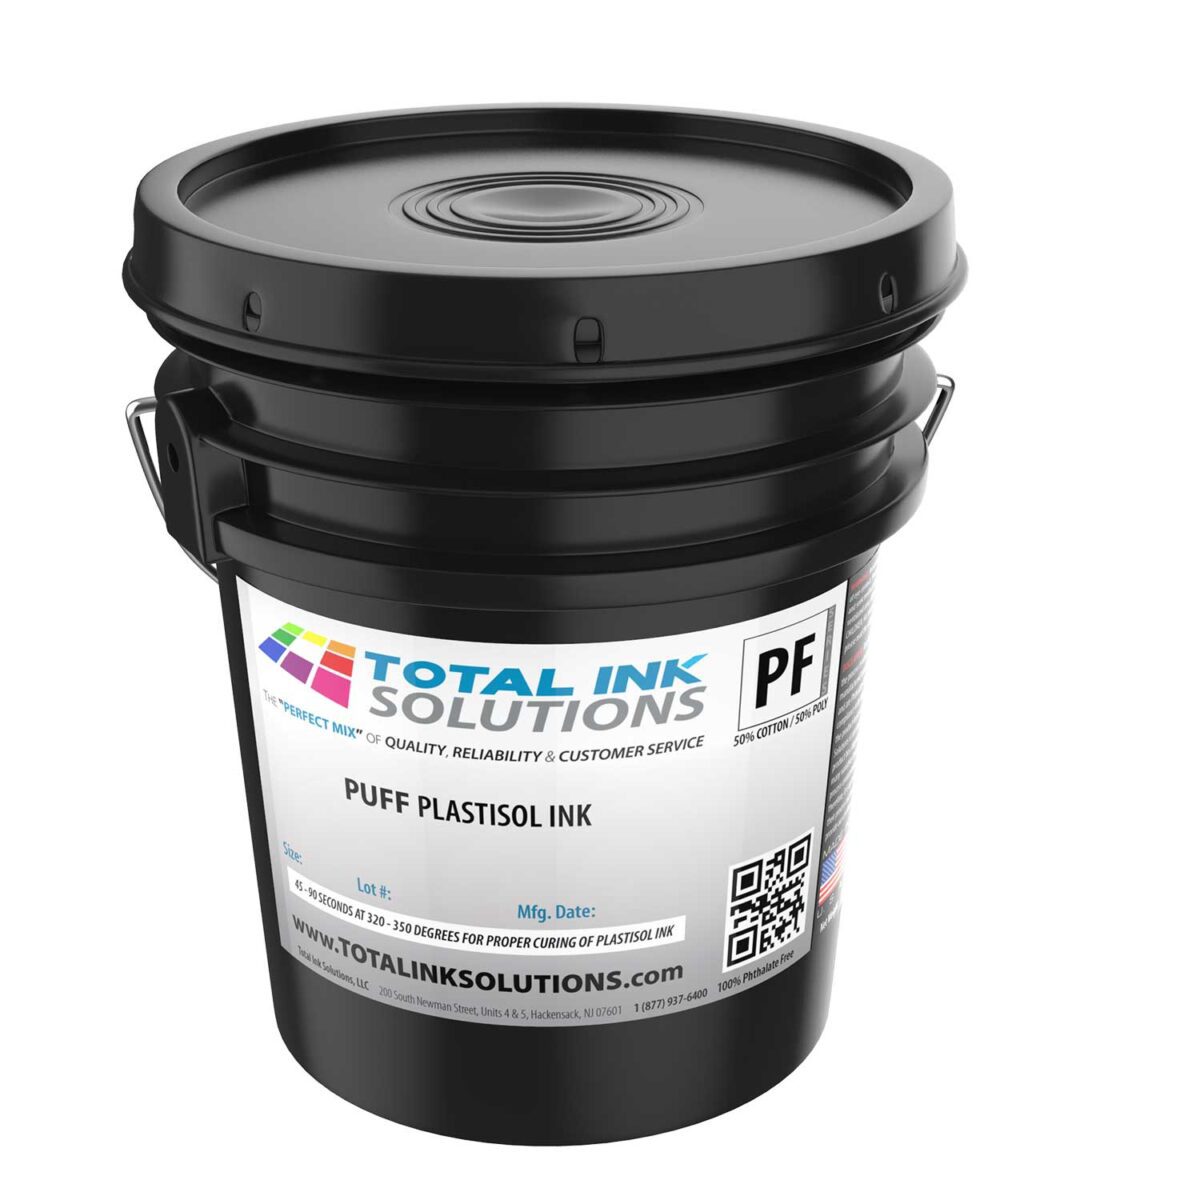 Puff Plastisol Ink -5 Gallon TOTAL INK SOLUTIONS®